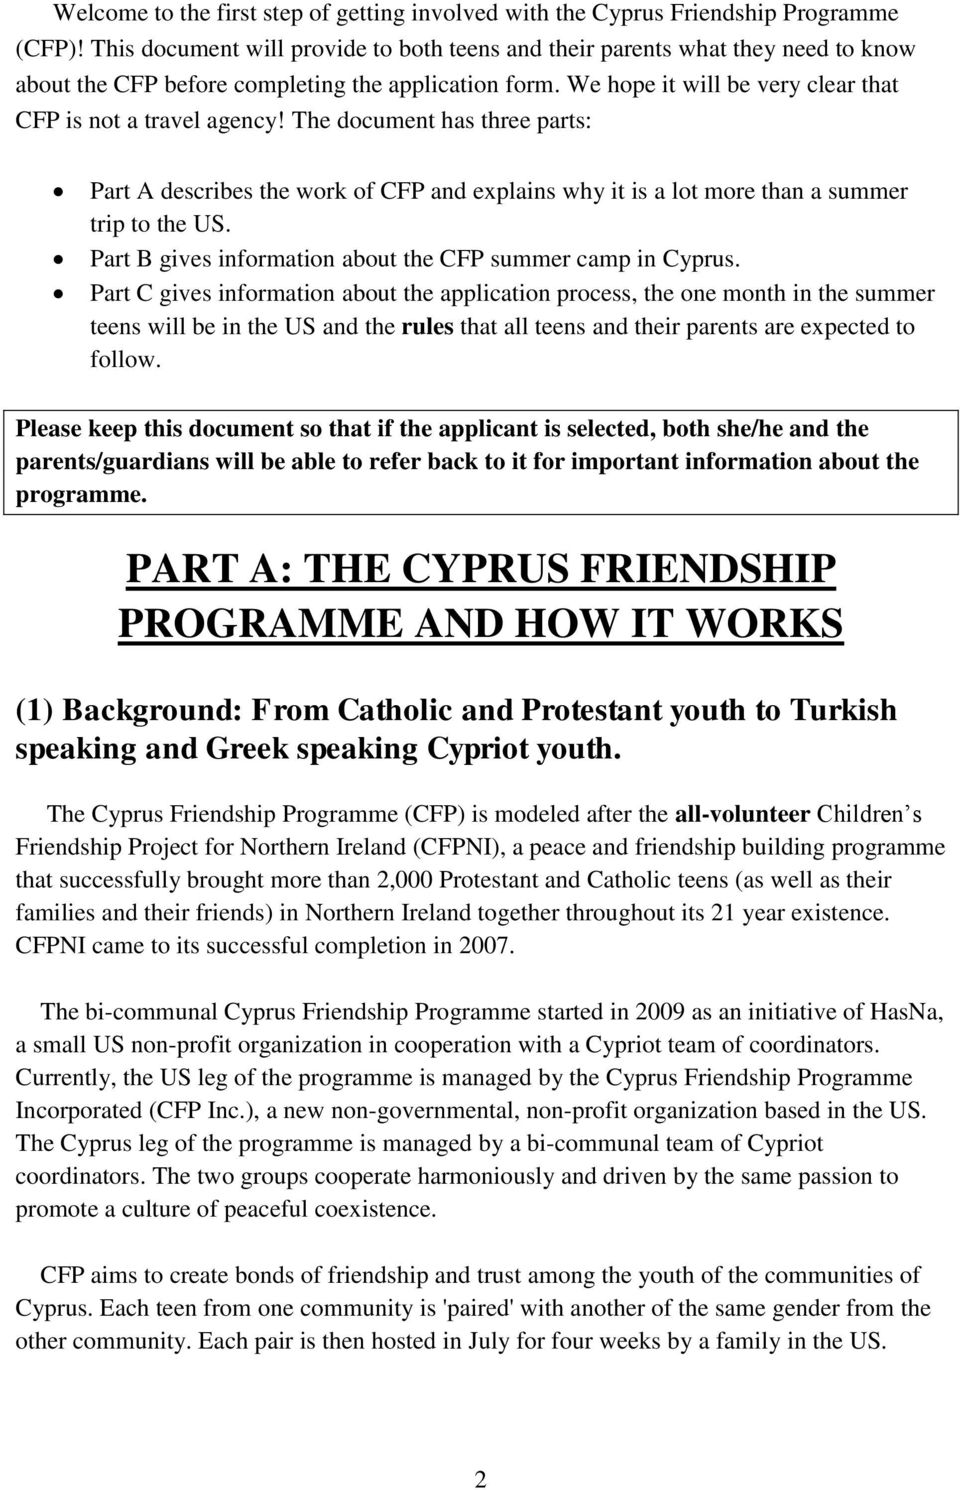 The document has three parts: Part A describes the work of CFP and explains why it is a lot more than a summer trip to the US. Part B gives information about the CFP summer camp in Cyprus.